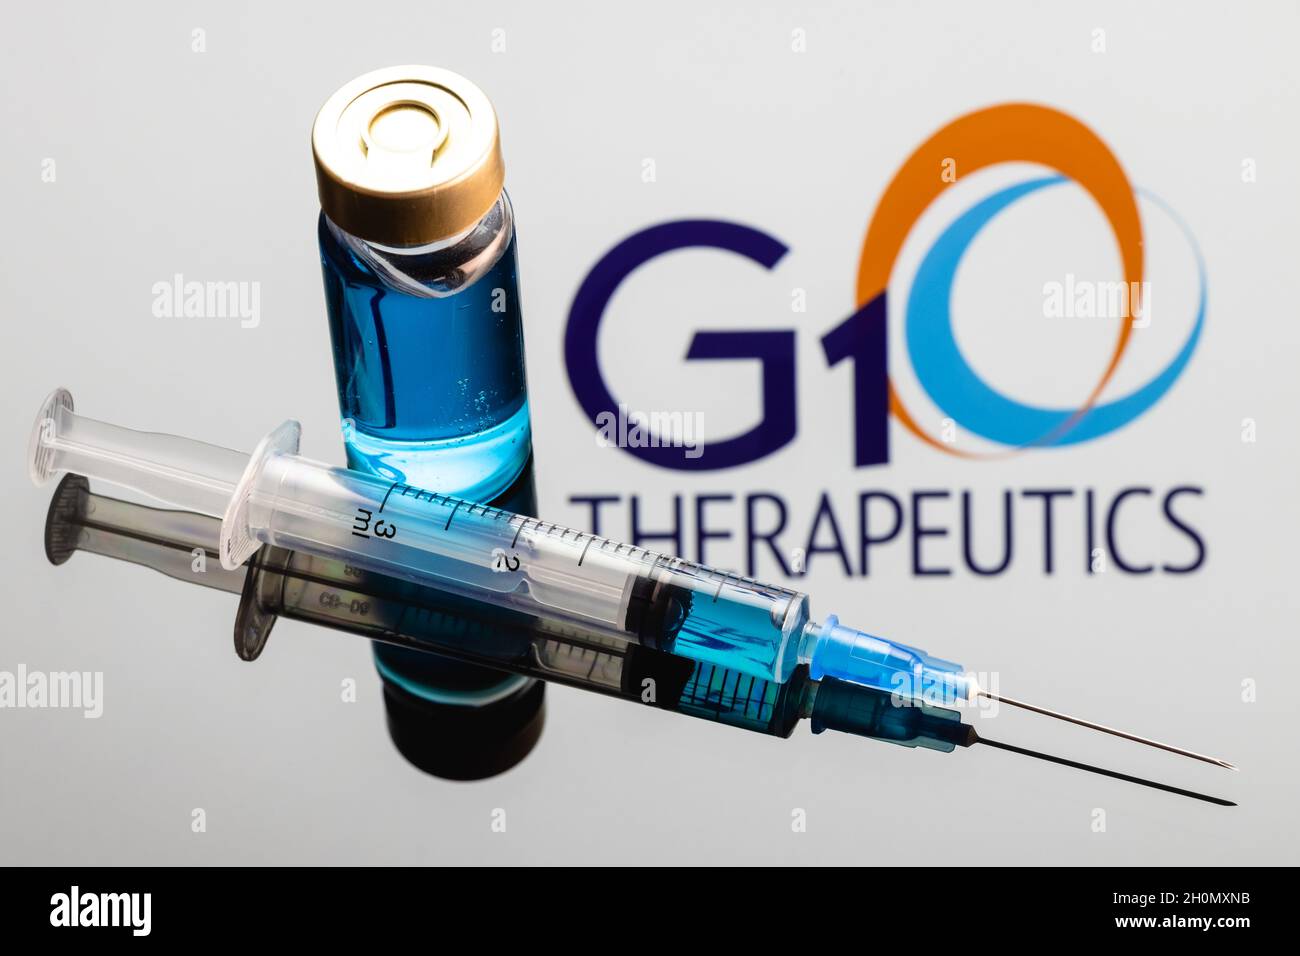 G1 Therapeutics is biopharmaceutical company specializes in small molecule therapeutics for the treatment of patients with cancer. Stock Photo